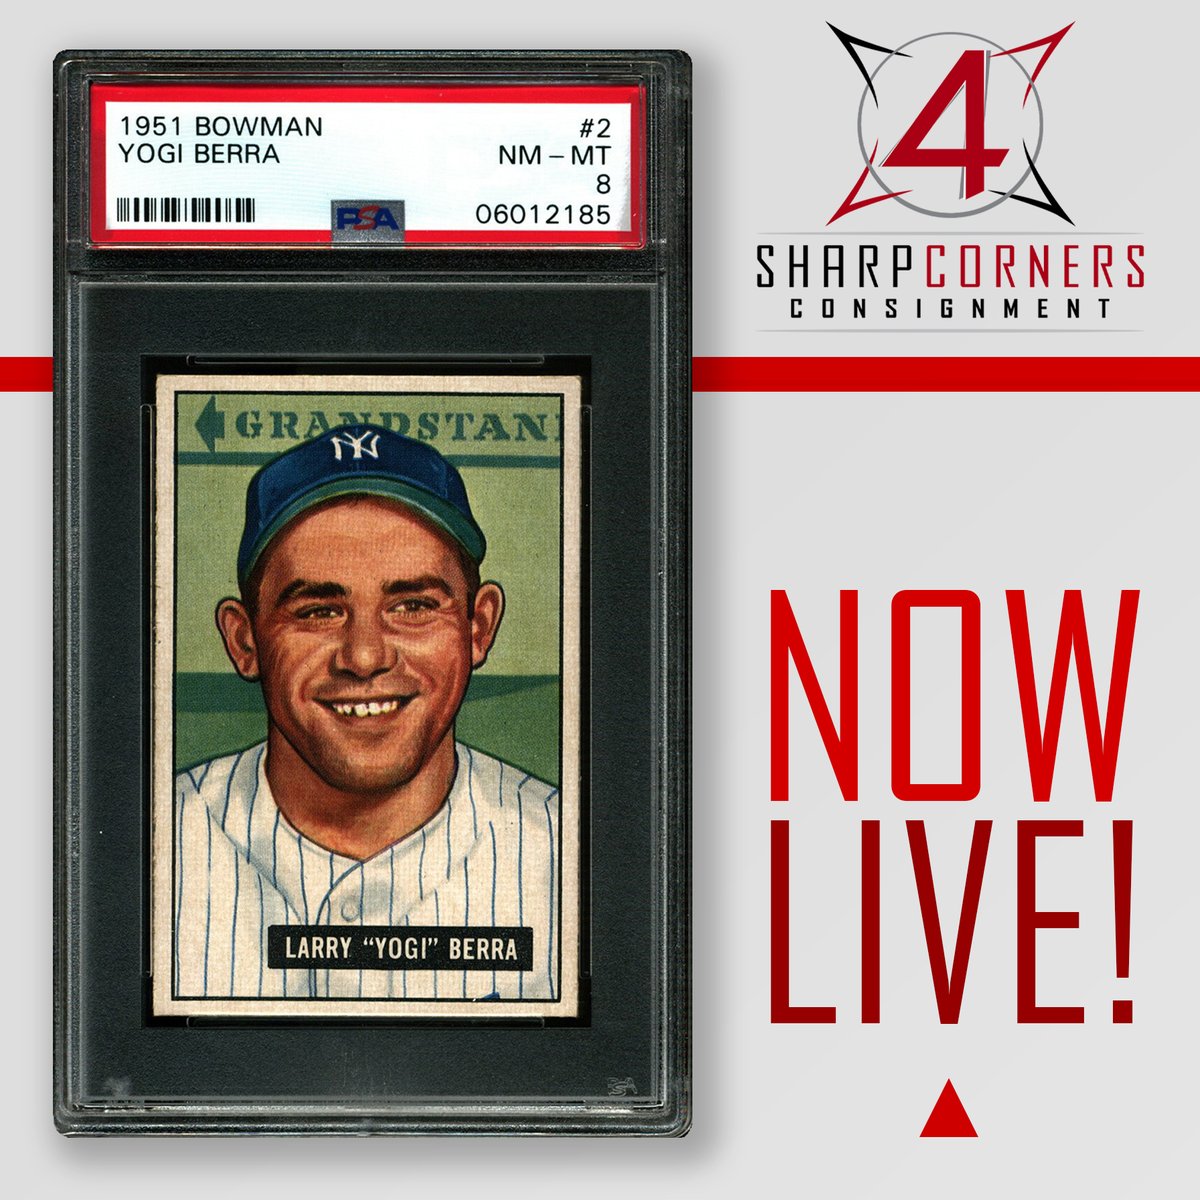 Mantle & Berra were quite the duo. Winning 7 World Series as teammates, they also combine for 38 All-Star selections and 6 AL MVP awards.
#NewYorkYankees #MickeyMantle #YogiBerra #MLB #Baseball #PSACard #Bowman #WhoDoYouCollect #TheHobby #CardCollection #CardCollector #Pinstripes